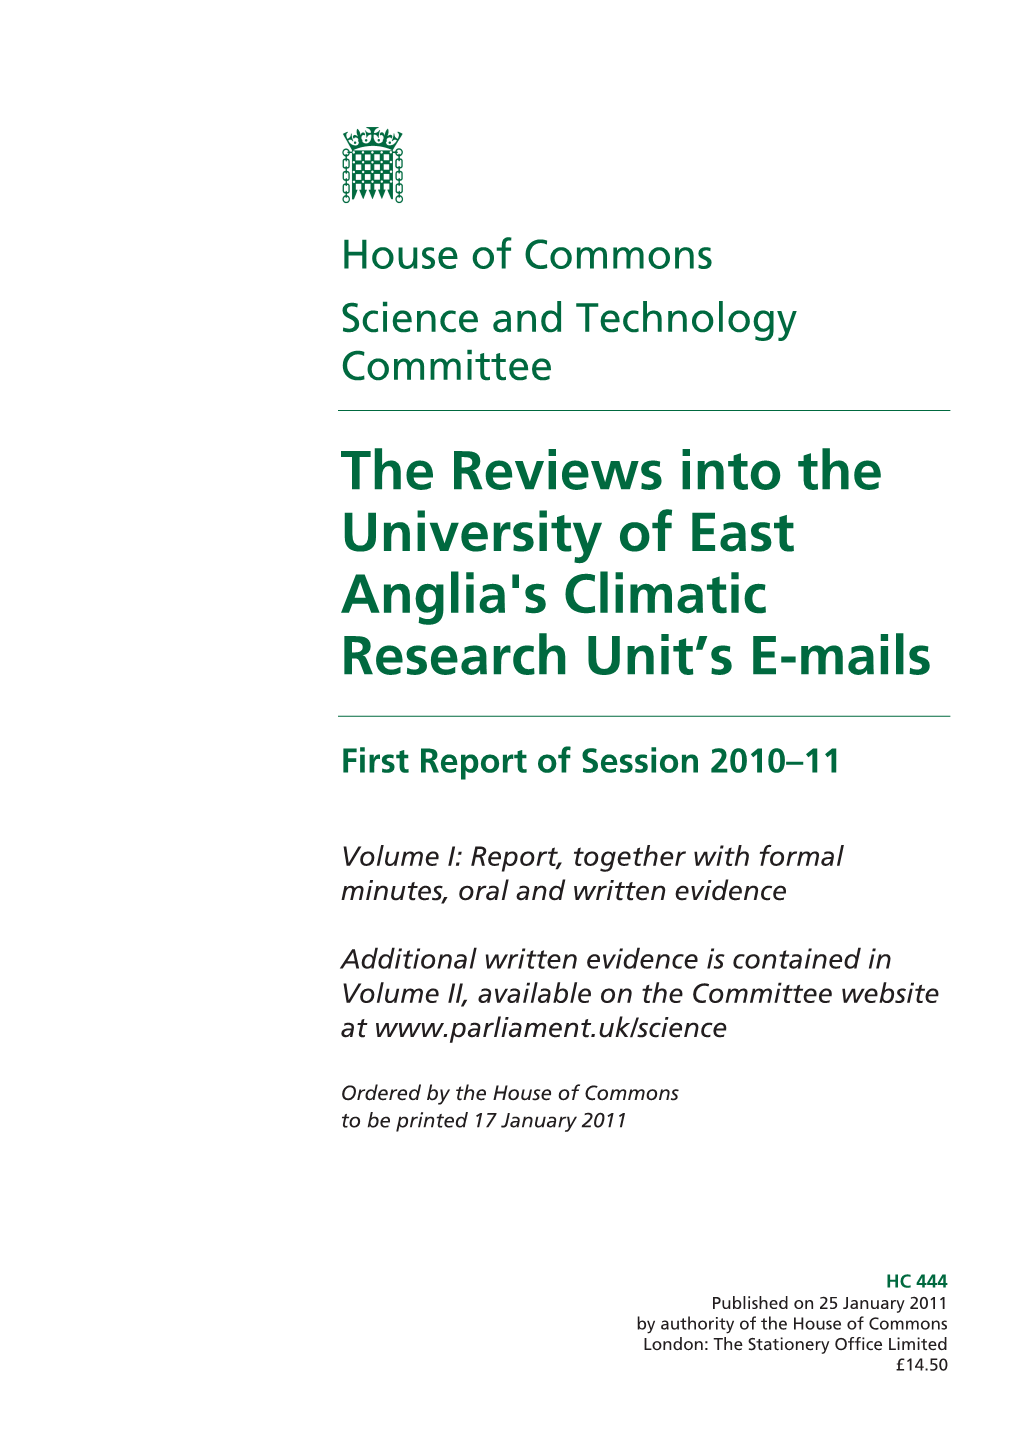 The Reviews Into the University of East Anglia's Climatic Research Unit’S E-Mails